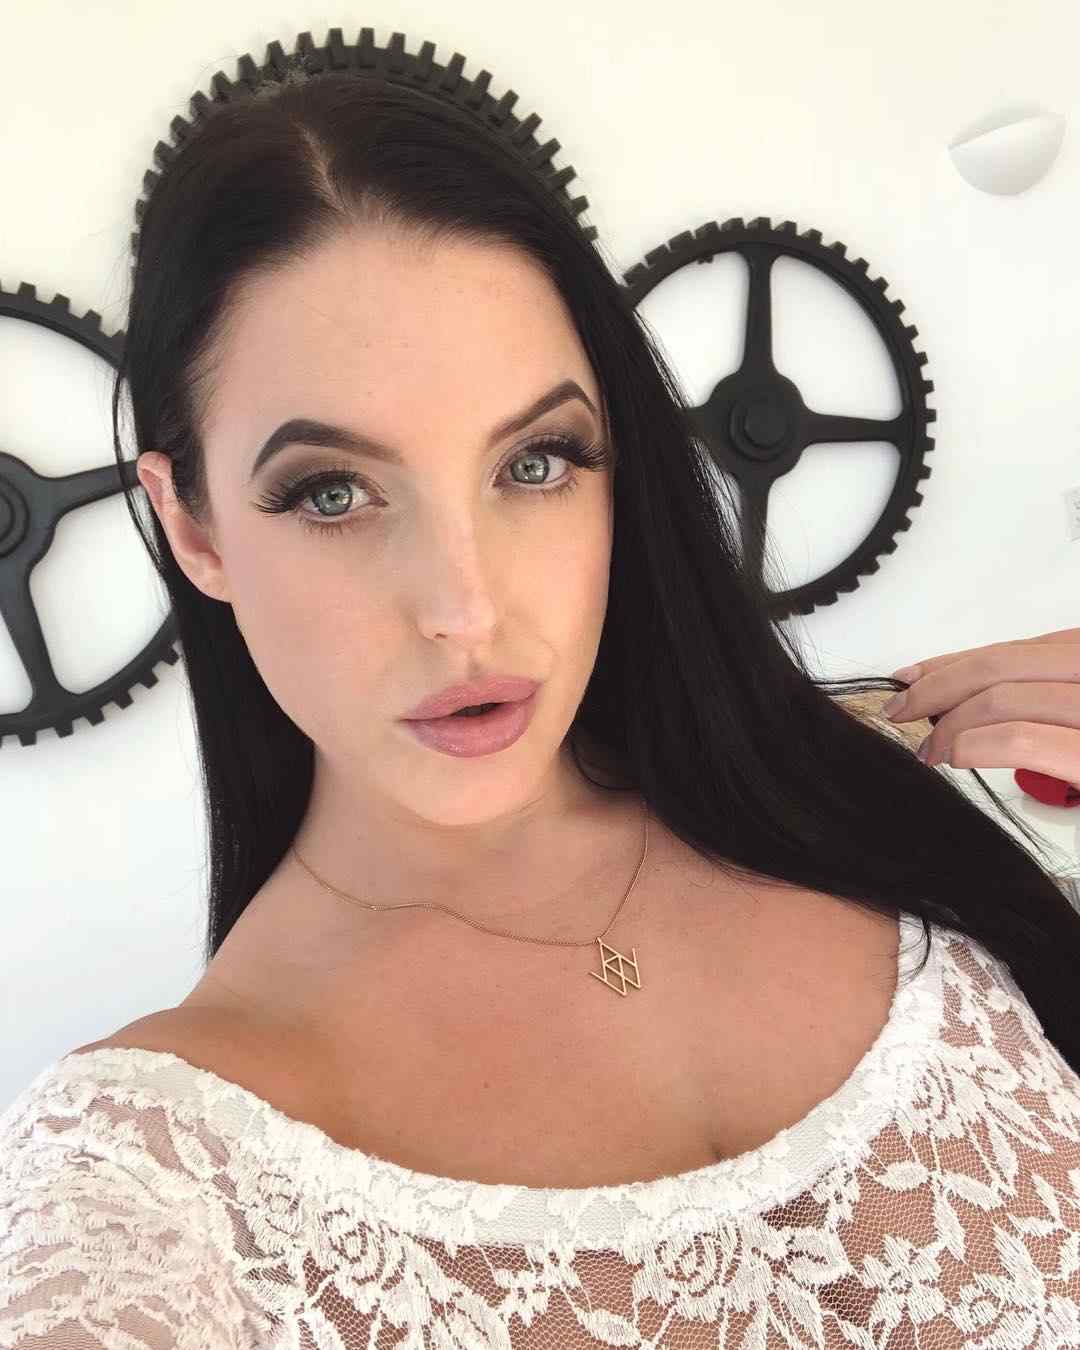 Angela White Biography, Wiki, Height, Age, Net Worth, Weight & Family